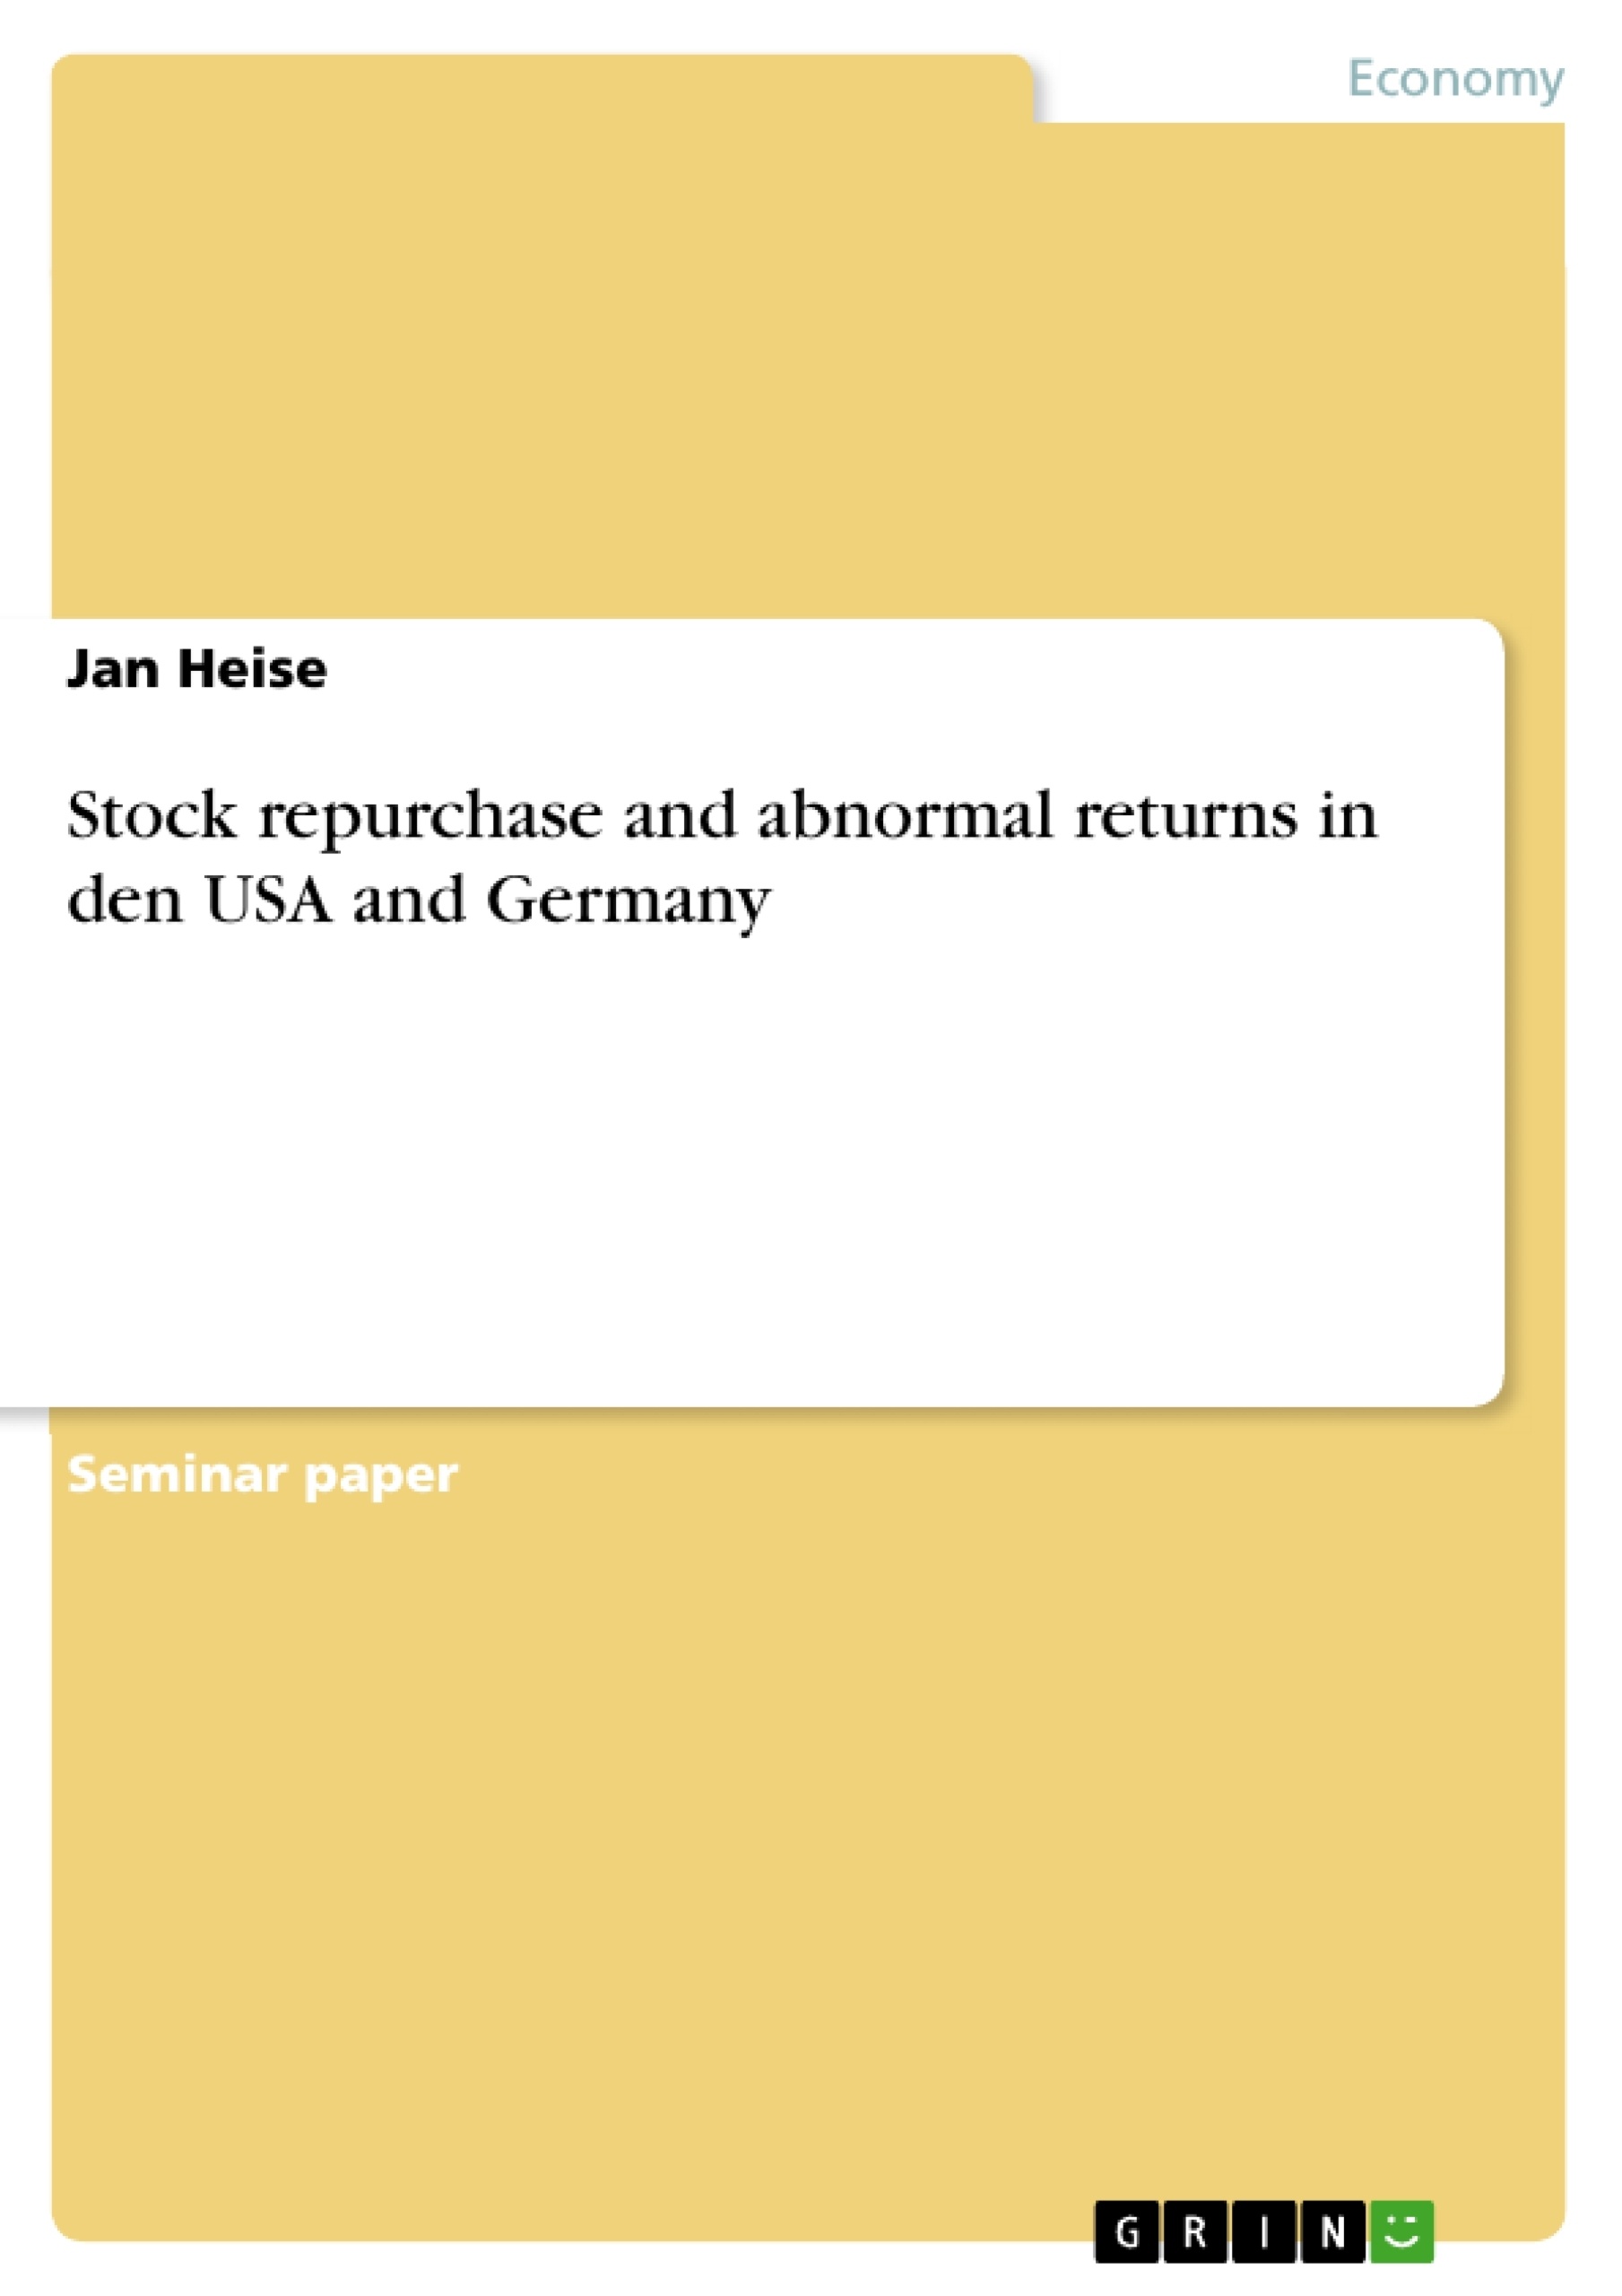 Title: Stock repurchase and abnormal returns in den USA and Germany